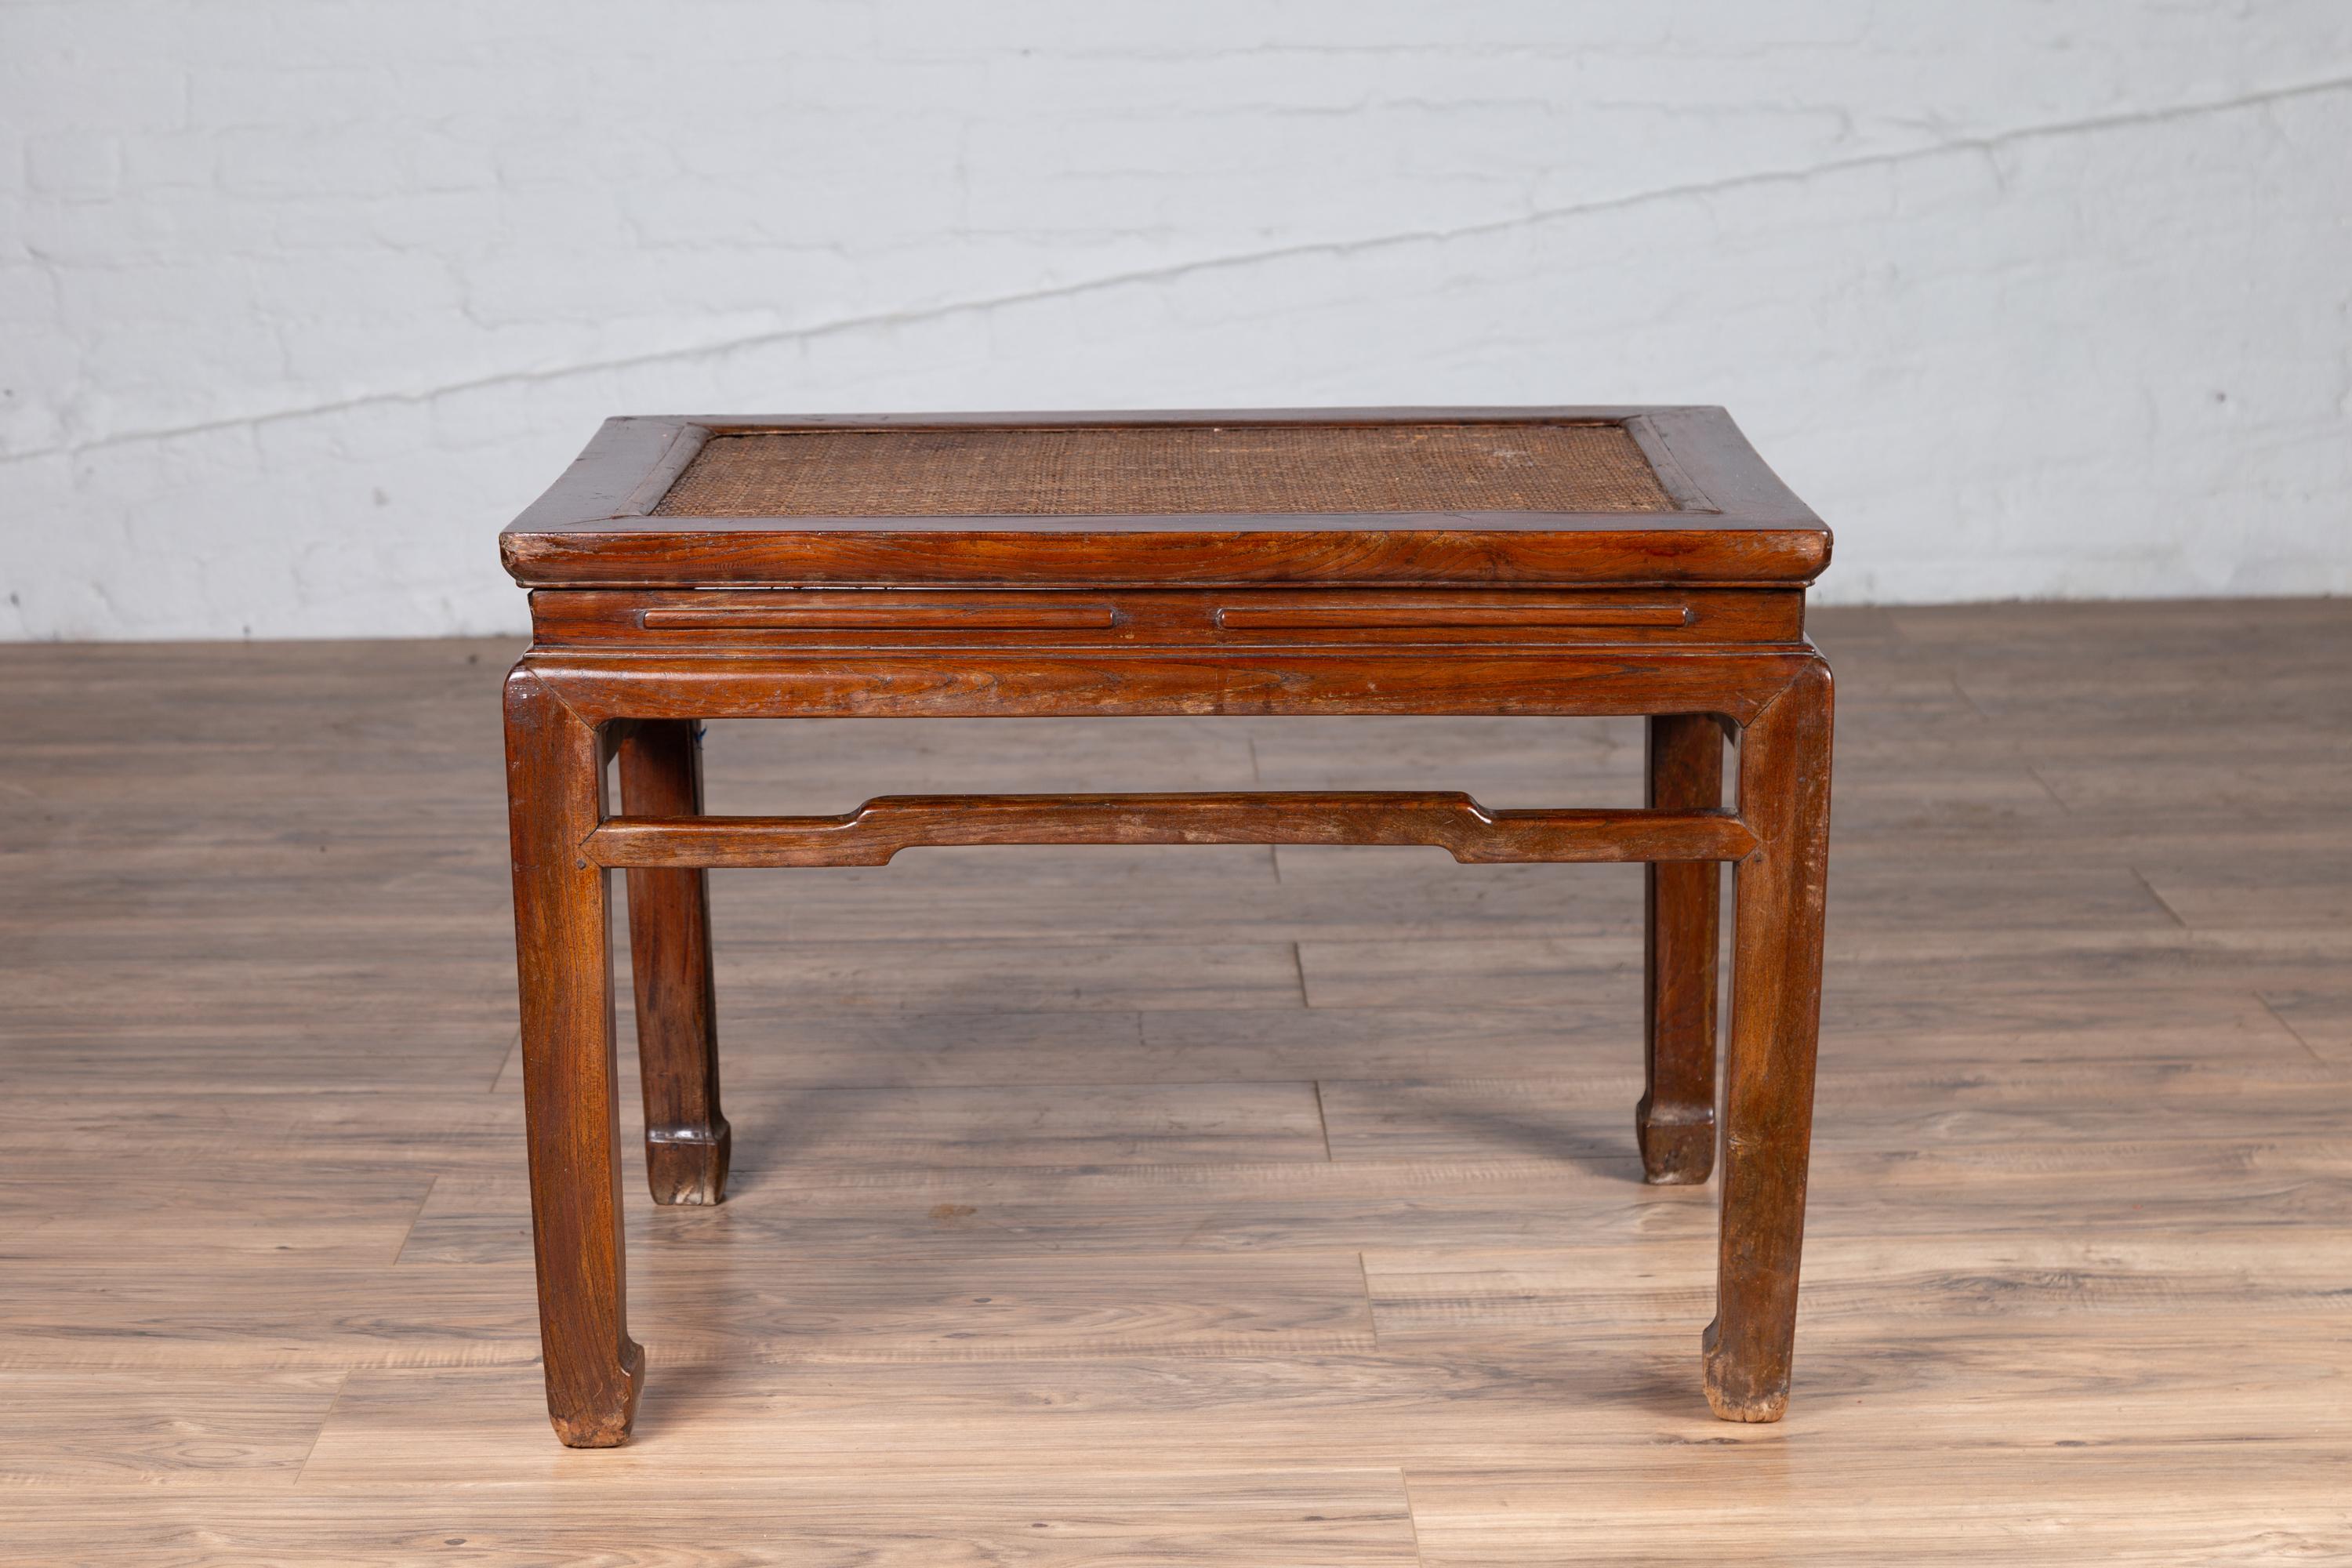 An antique Chinese Ming Dynasty style waisted side table from the early 20th century, with woven rattan top, humpbacked stretcher and horse hoof legs. Born in China during the early years of the 20th century, this elegant side table features a woven